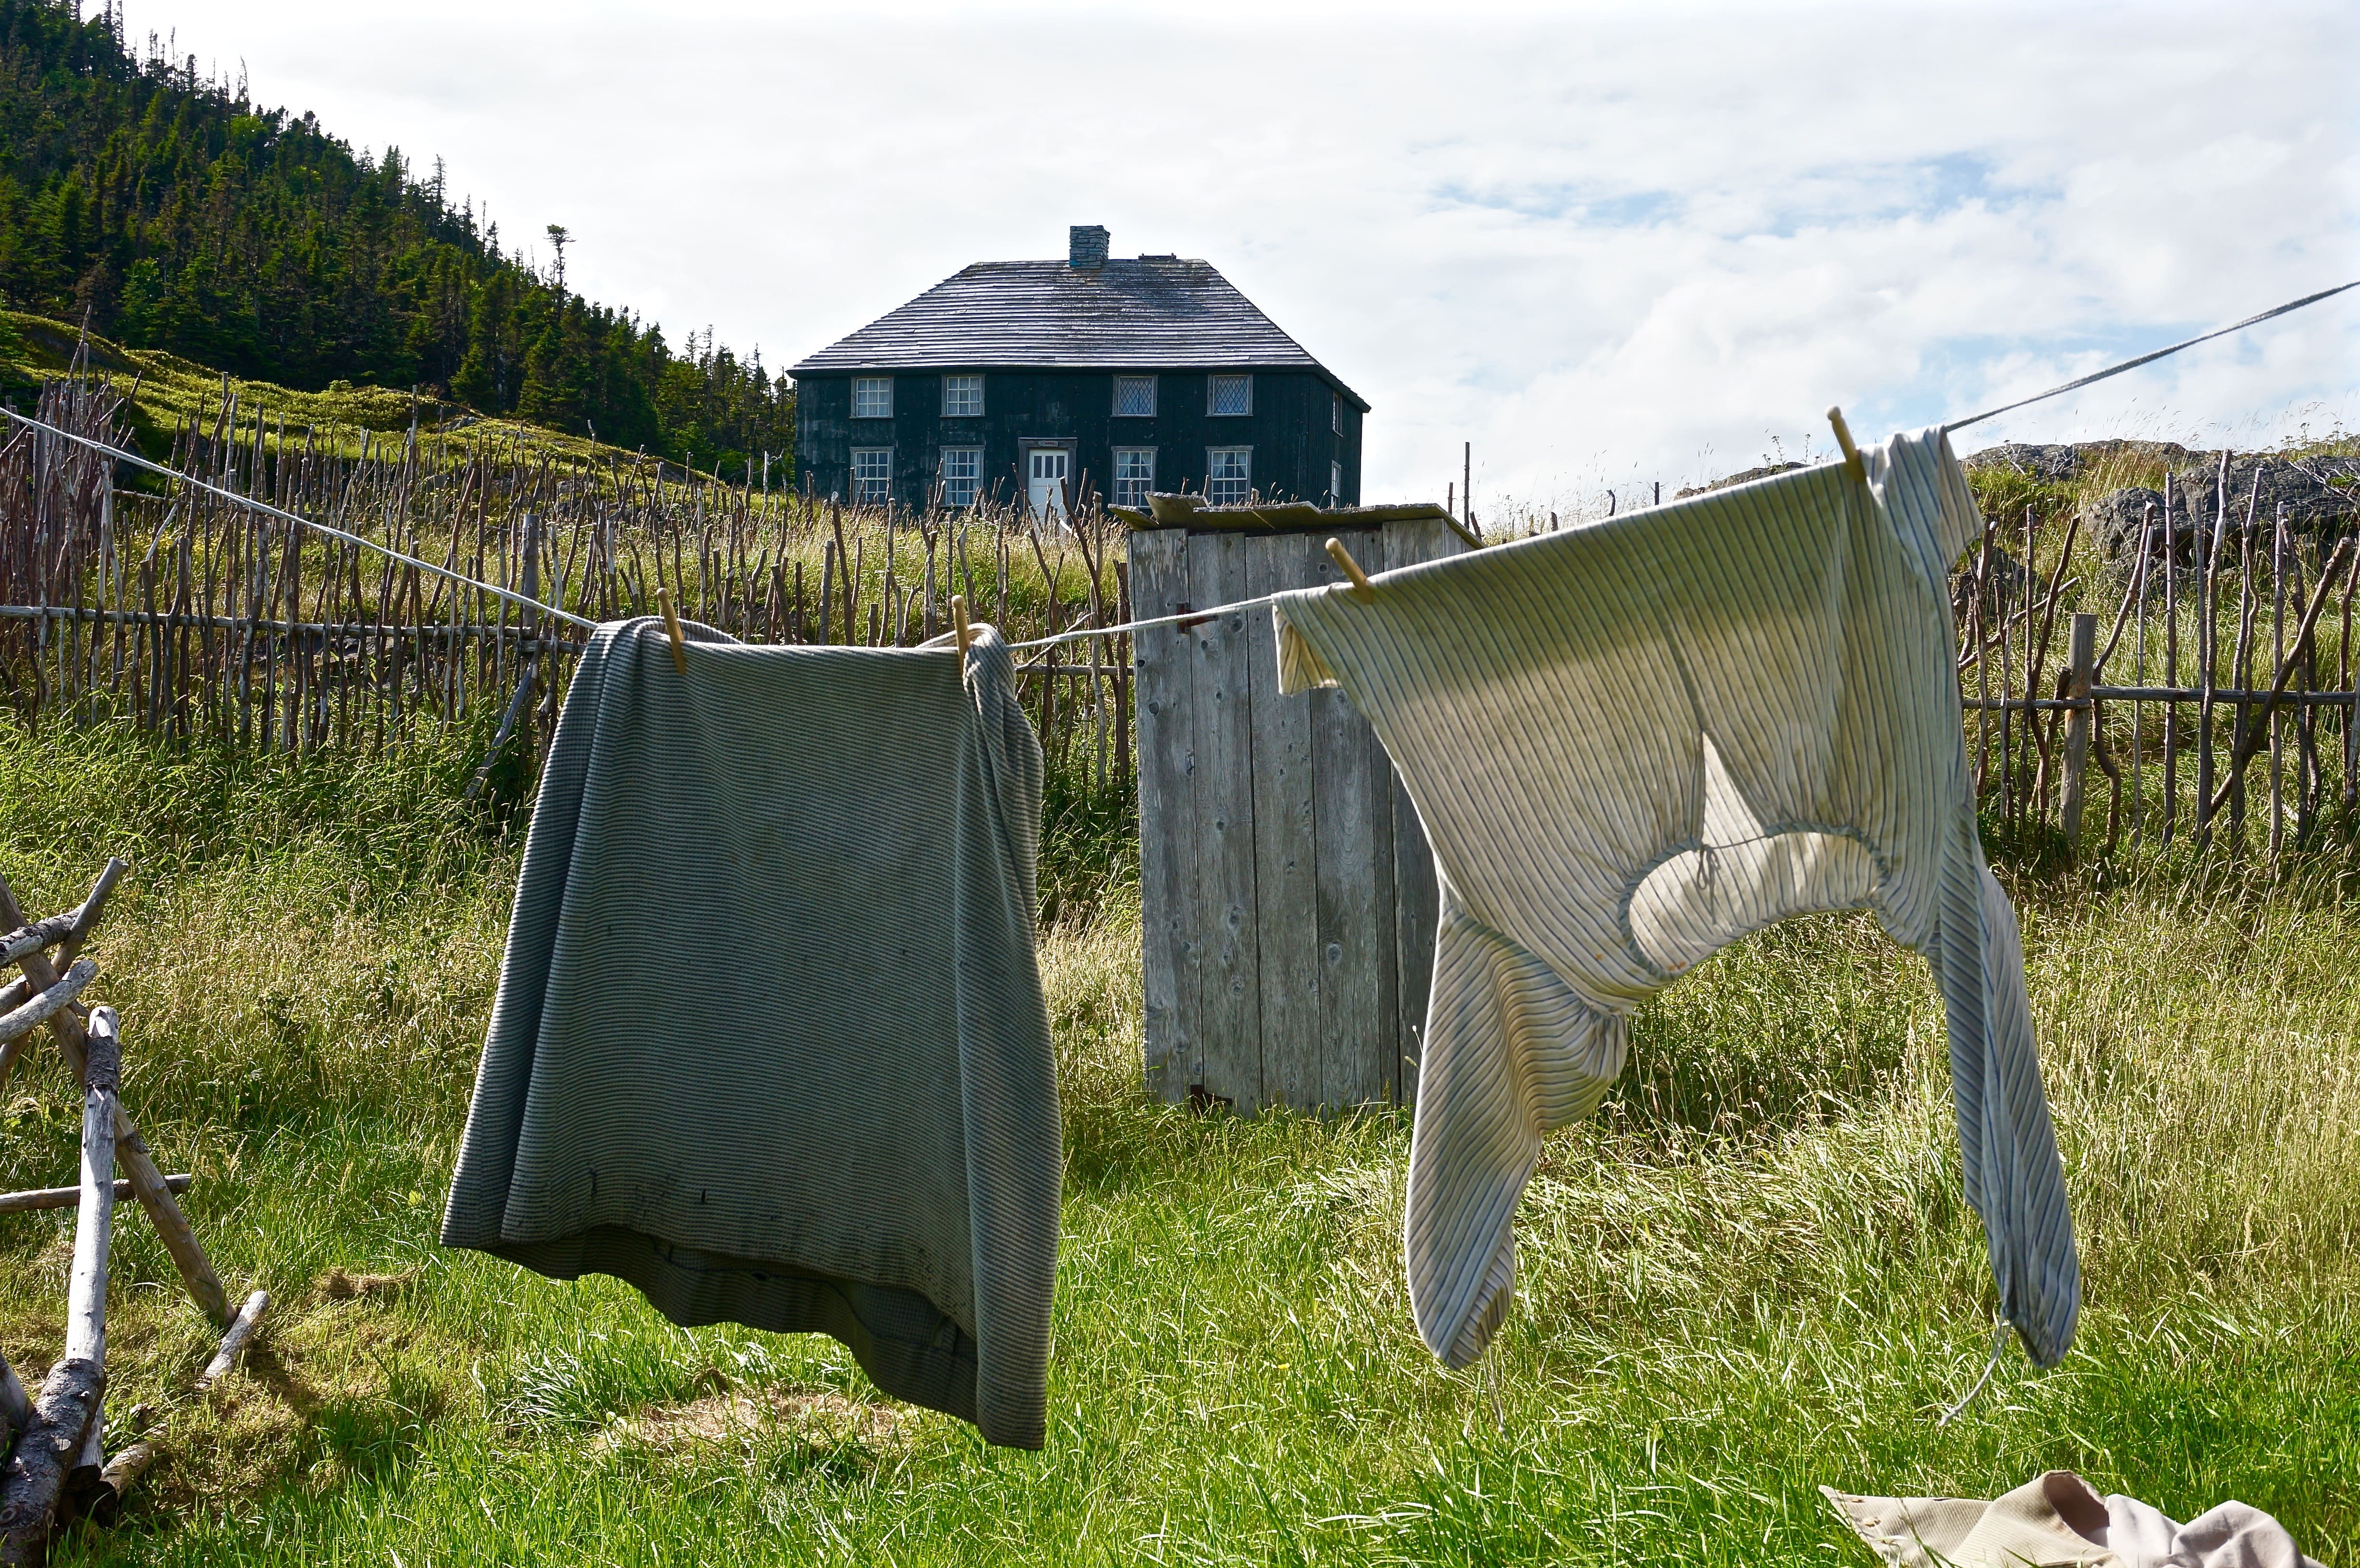 A laundry line is hung with clothing from the 19th century with a square green house in the background